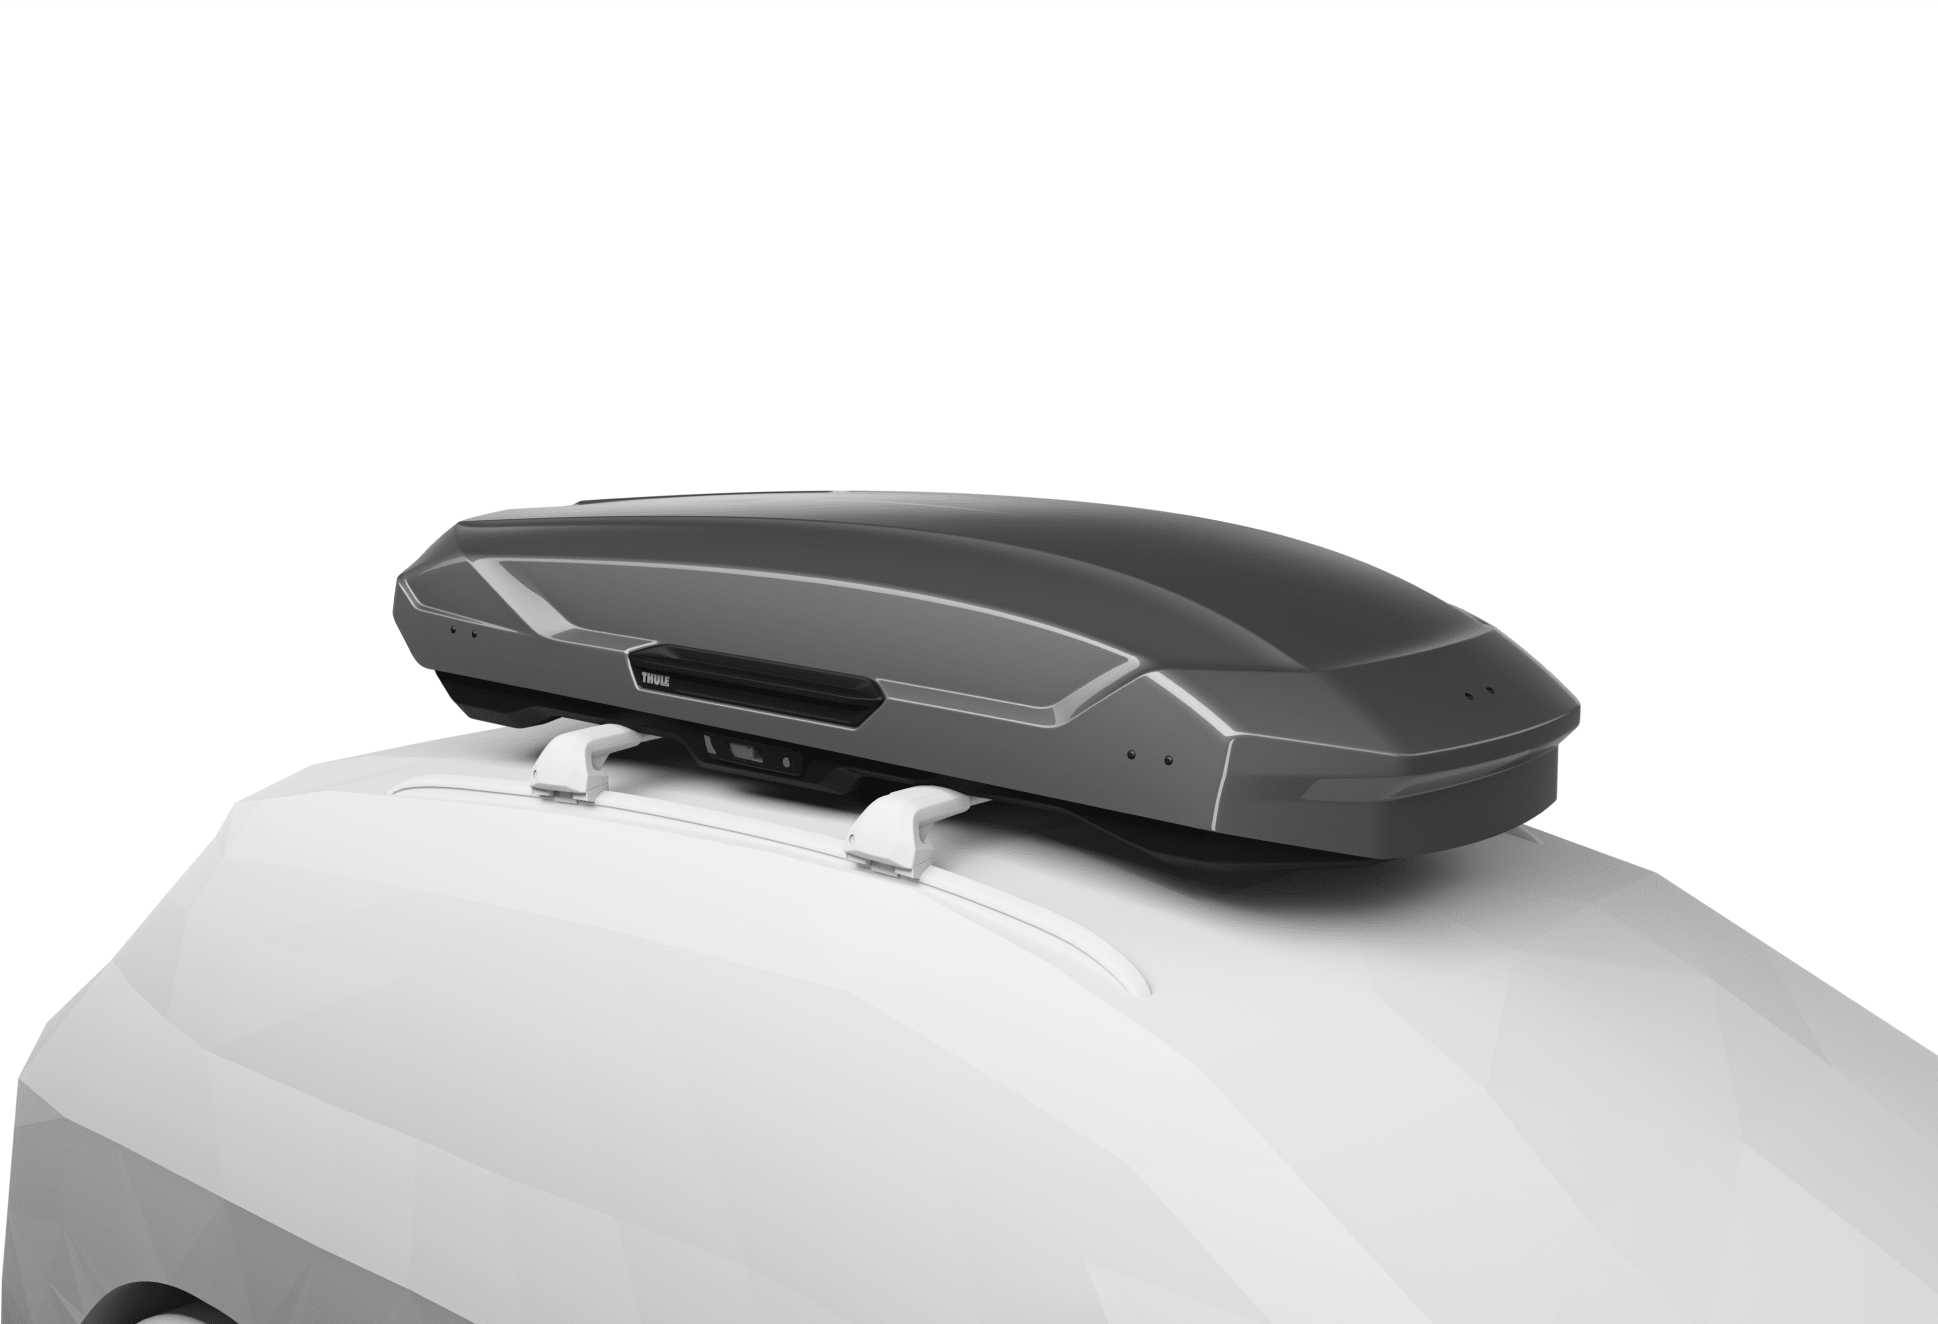 An image of a closed Thule Motion 3 roofbox mounted to the top of a vehicle.